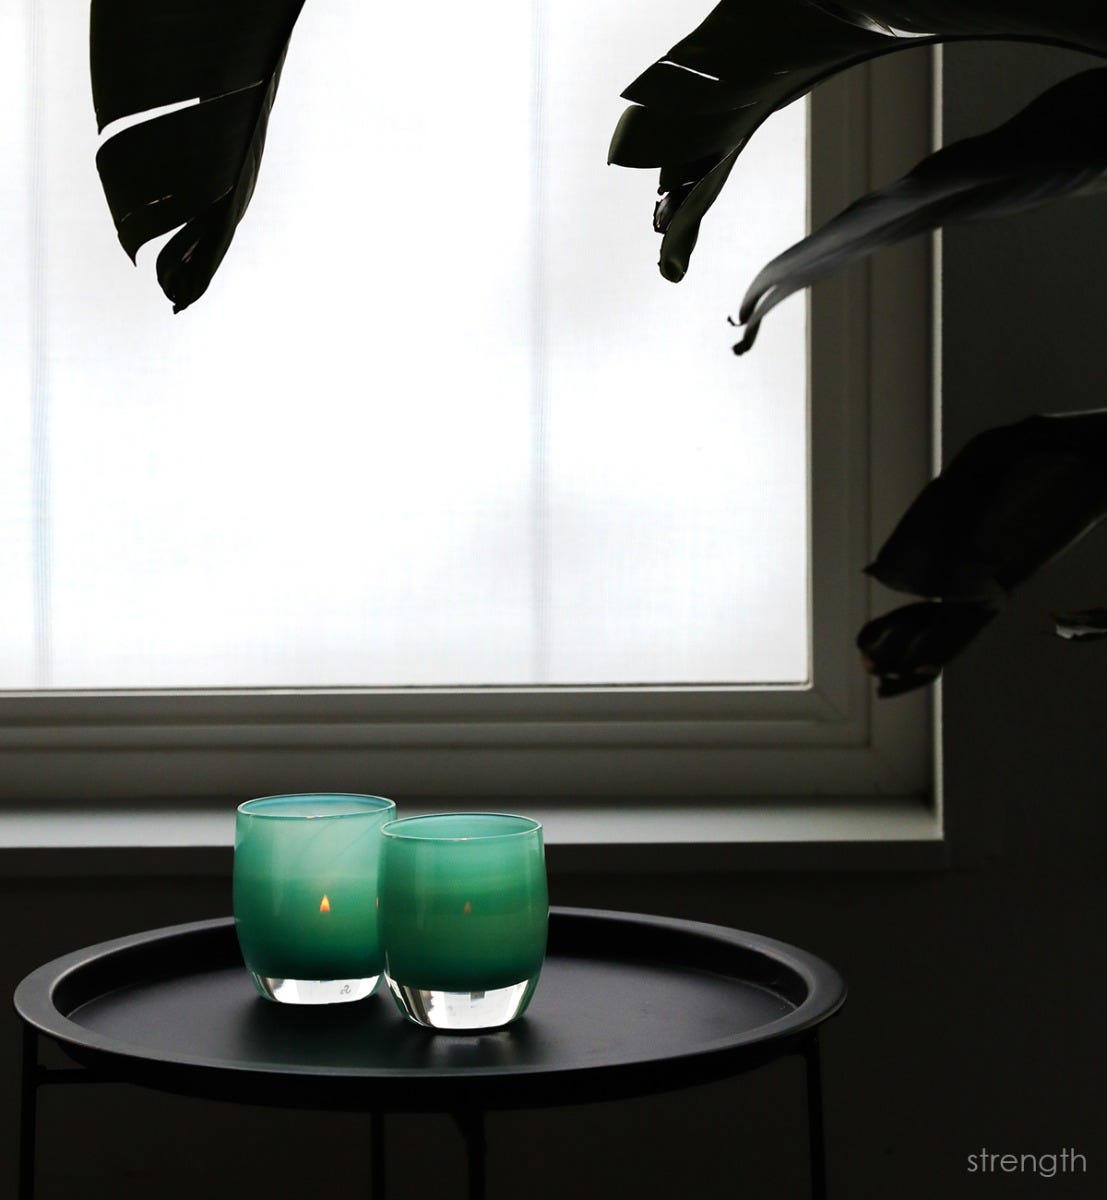 strength teal green hand-blown glass votive candle holder